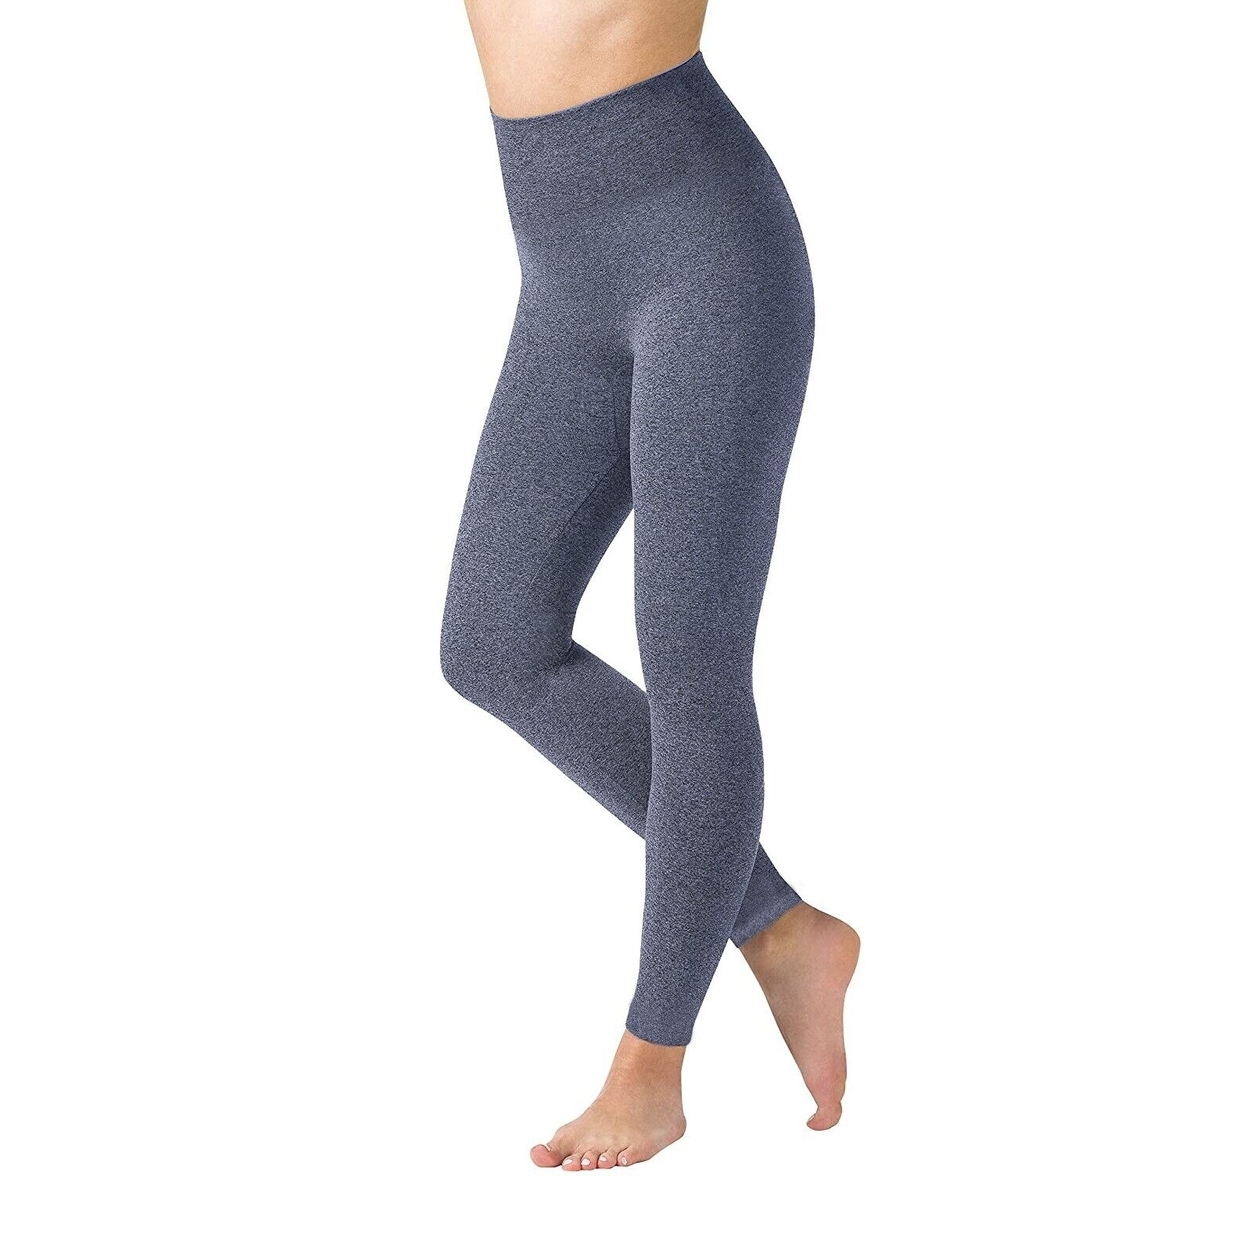 Women's Winter Warm Marled High Waist Fleece Lined Thick Thermal Leggings Pants - Navy, X-large